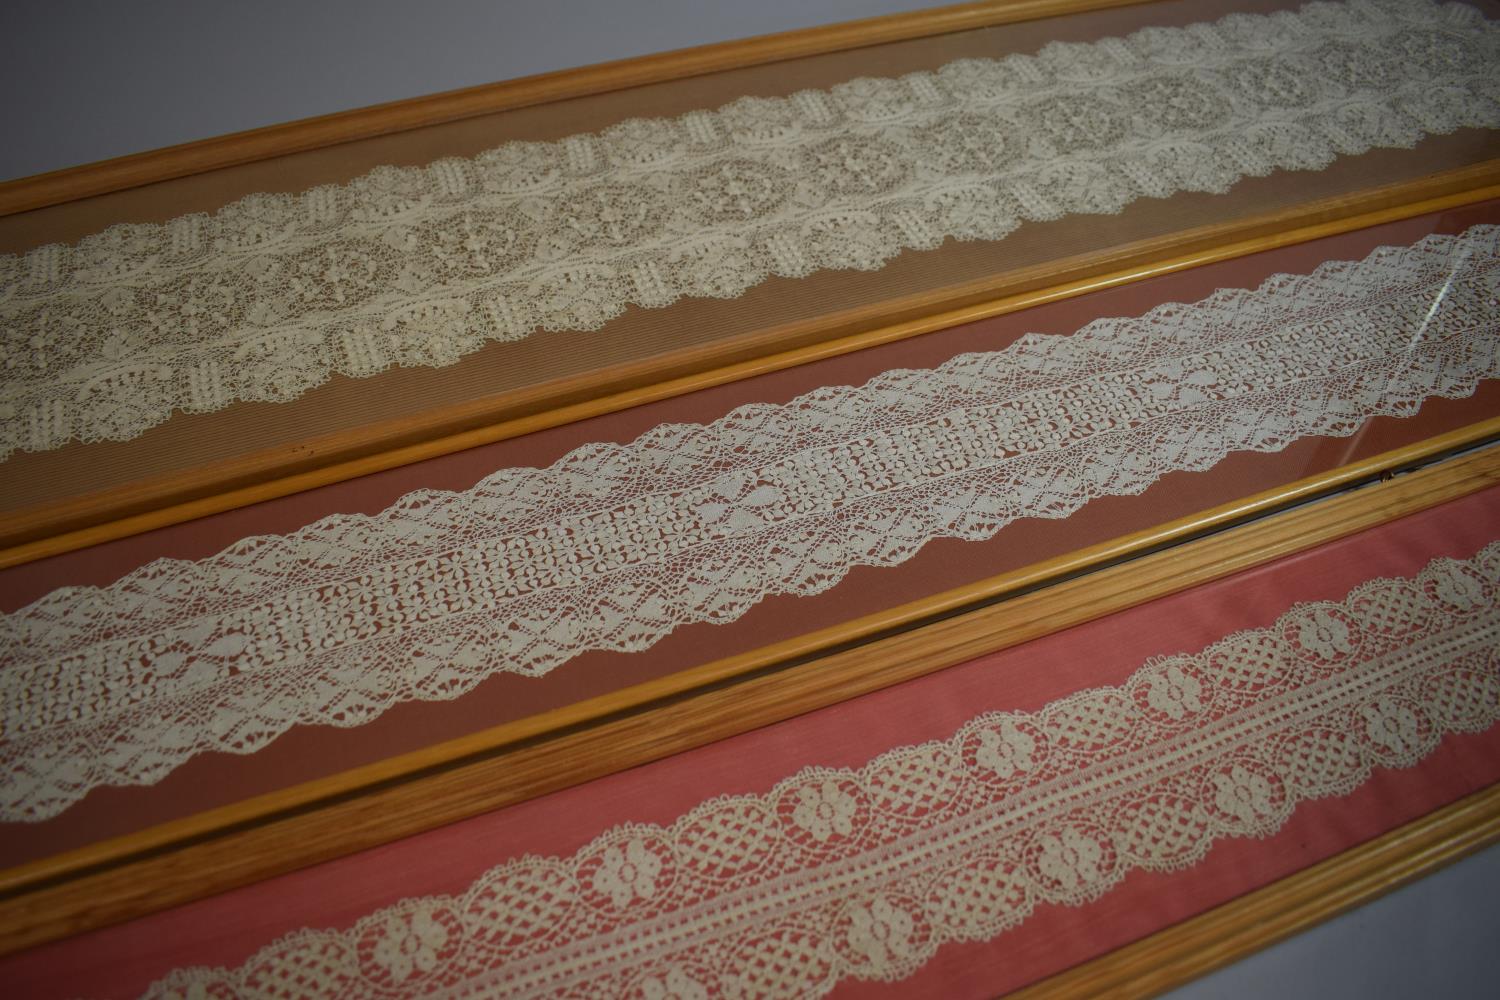 A Collection of Three Framed 19th Century Framed Lace Lappets with Scalloped Edges - Image 2 of 3